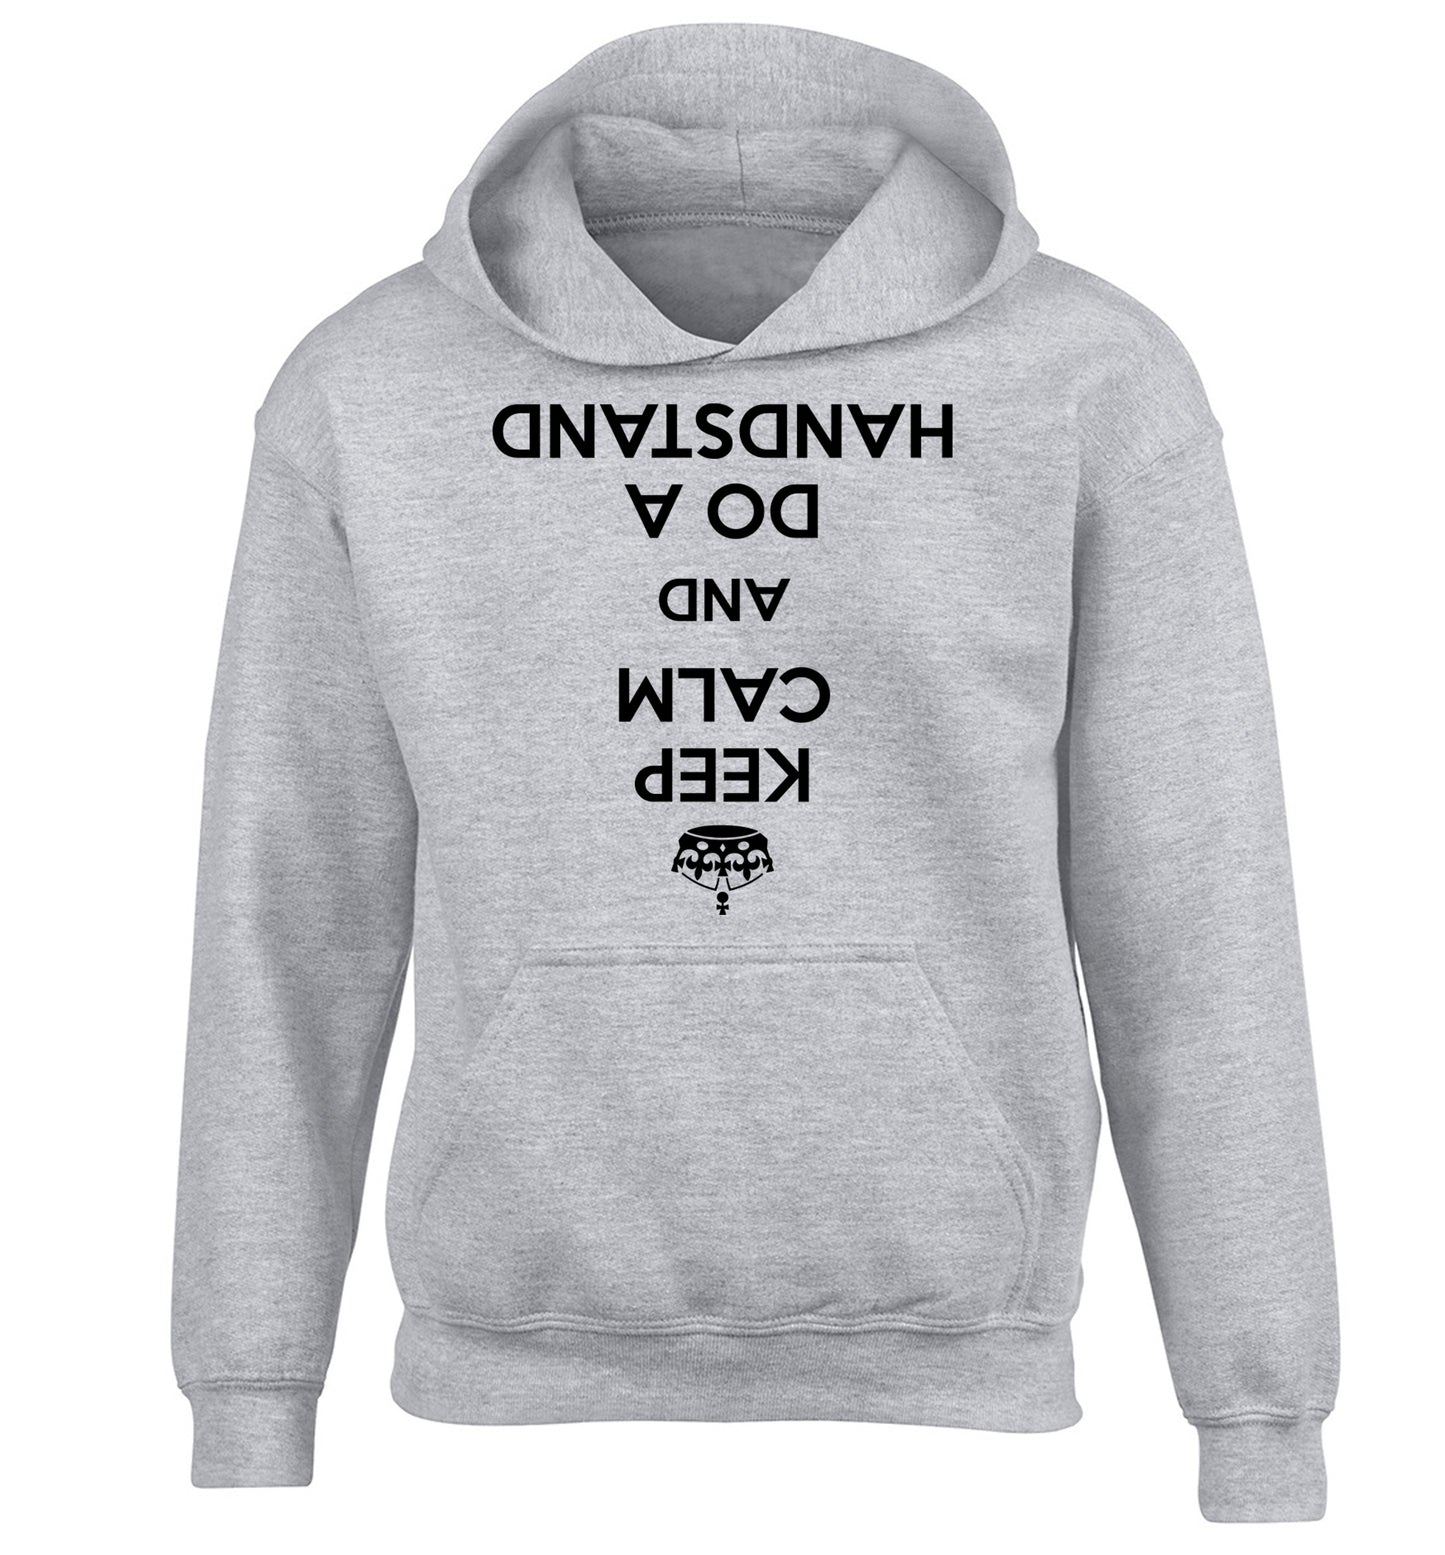 Keep calm and do a handstand children's grey hoodie 12-13 Years